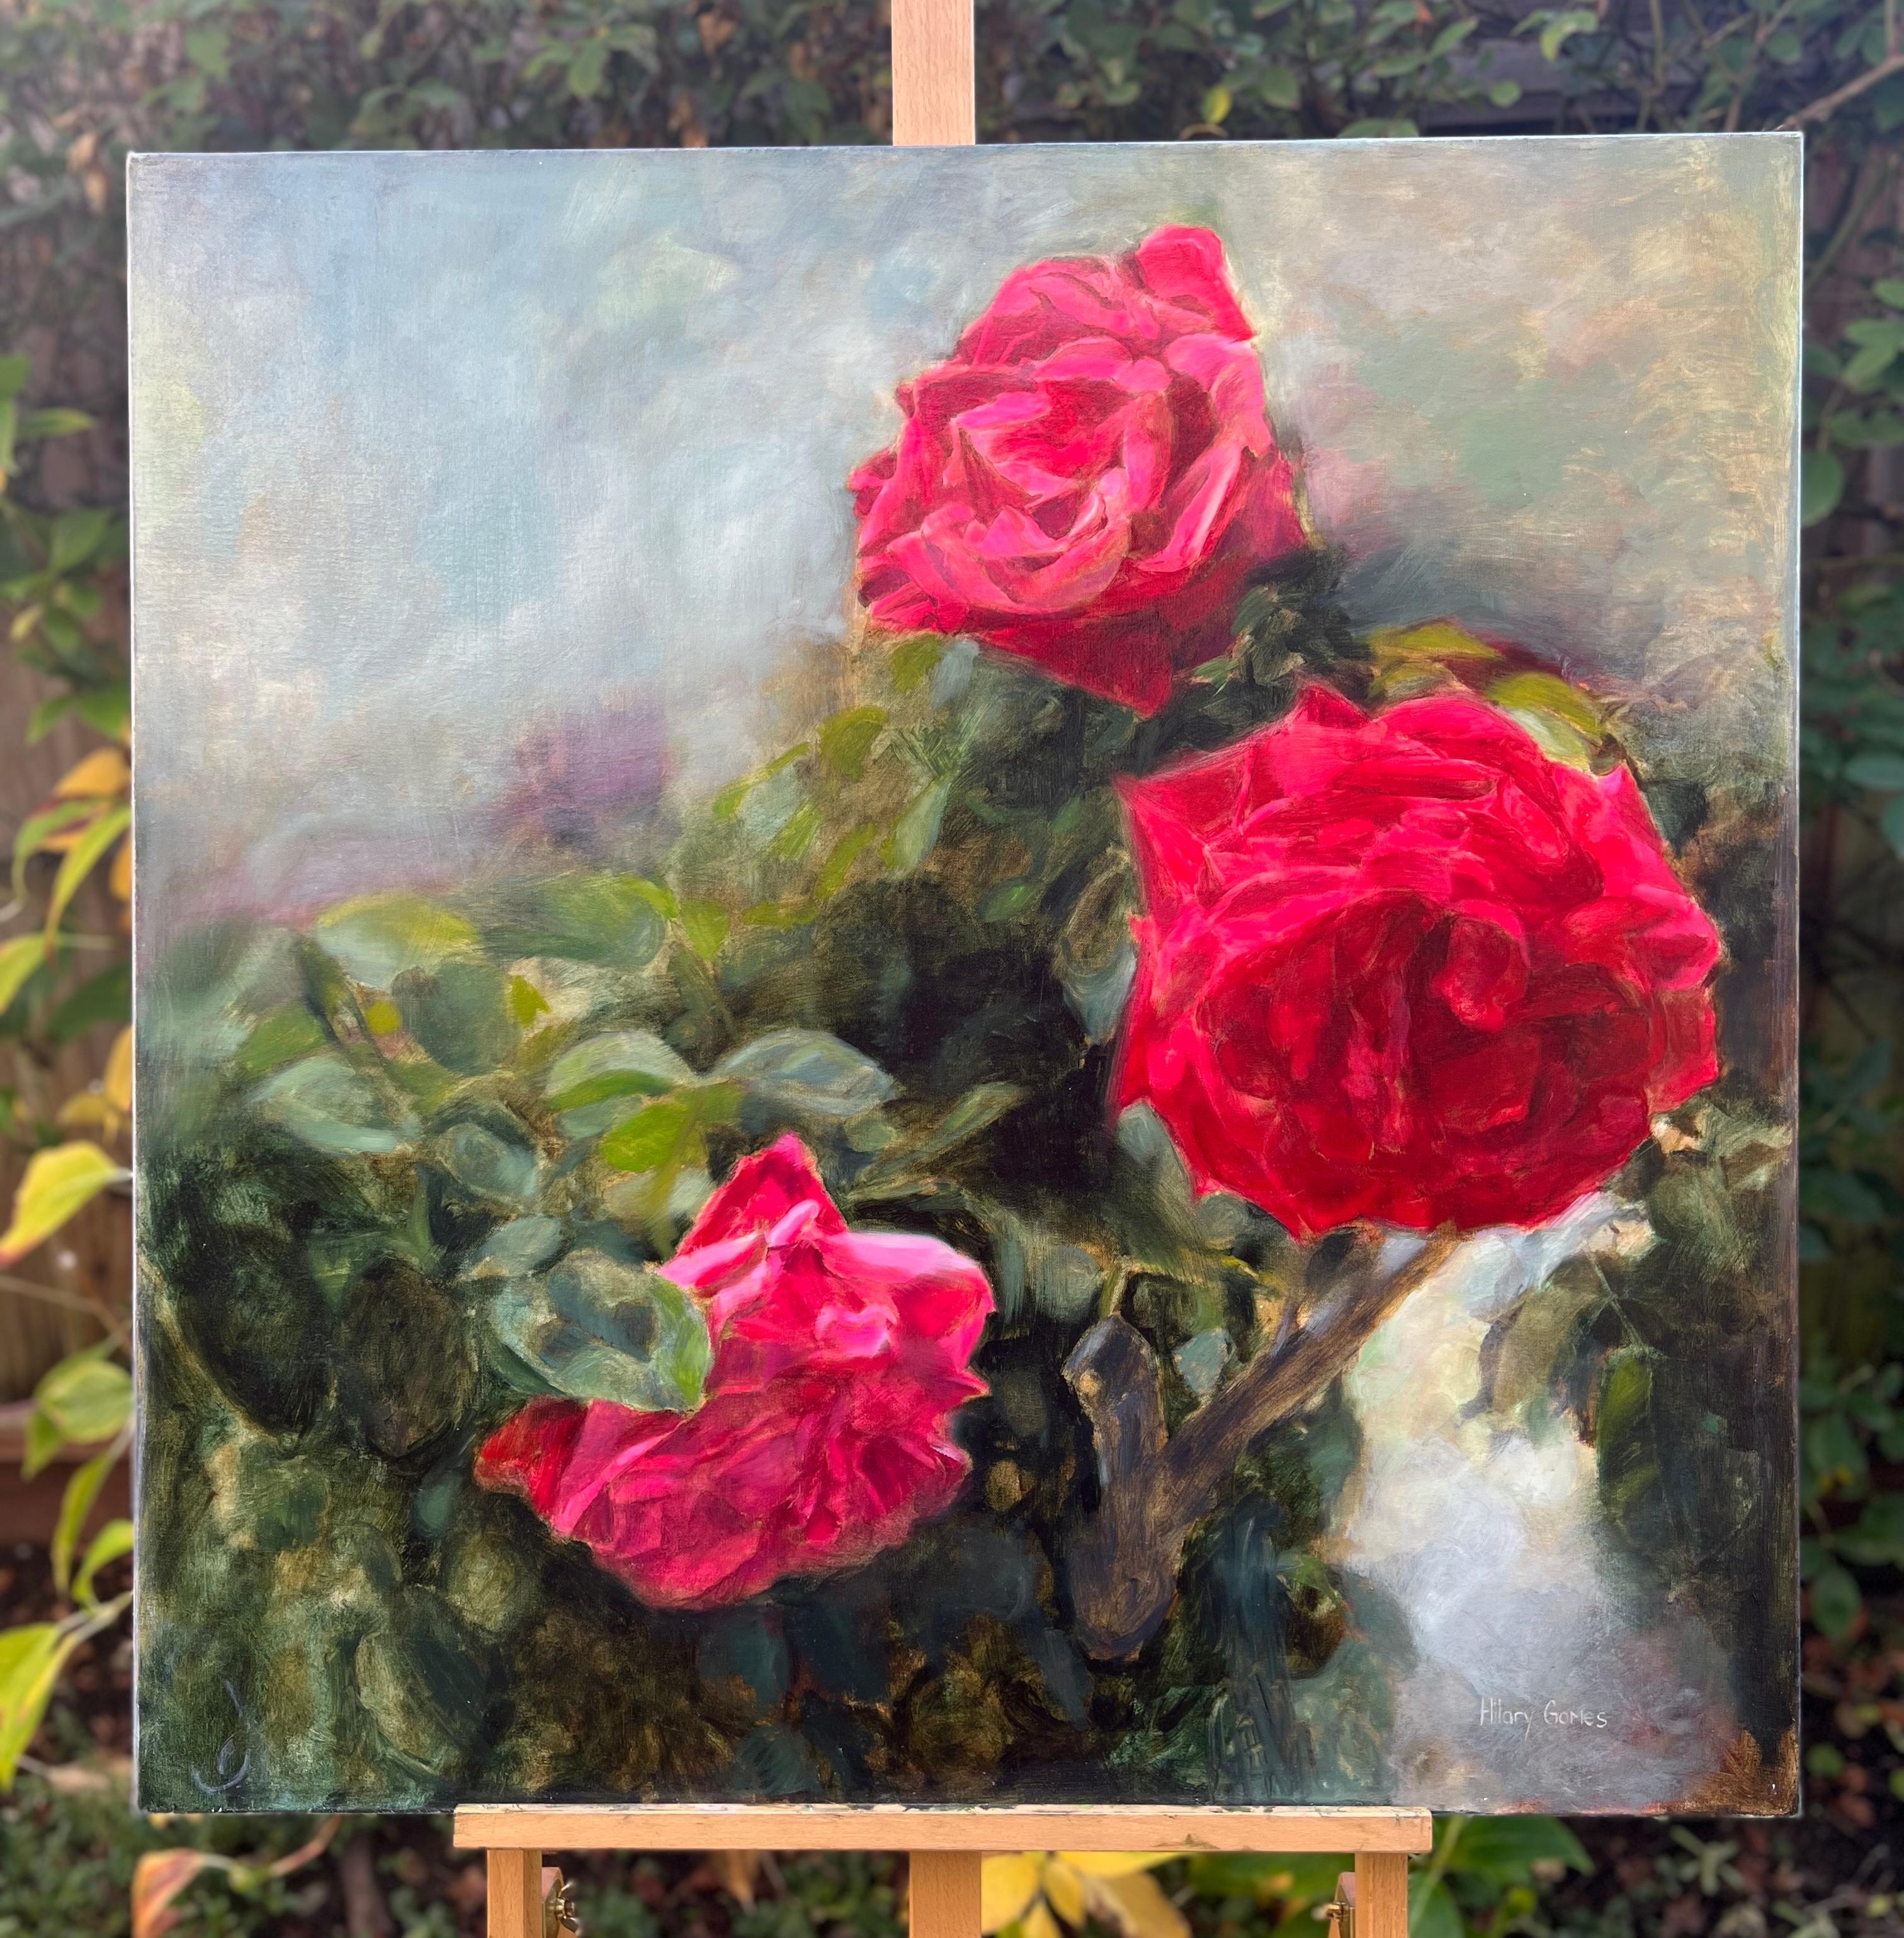 <p>Artist Comments<br>Red roses bloom in the bright sunlight. Against the hazy garden background, the soft edges of their petals reveal their delicate nature, giving a classical feel to the piece. The grisaille underpainting and the glaze layers add